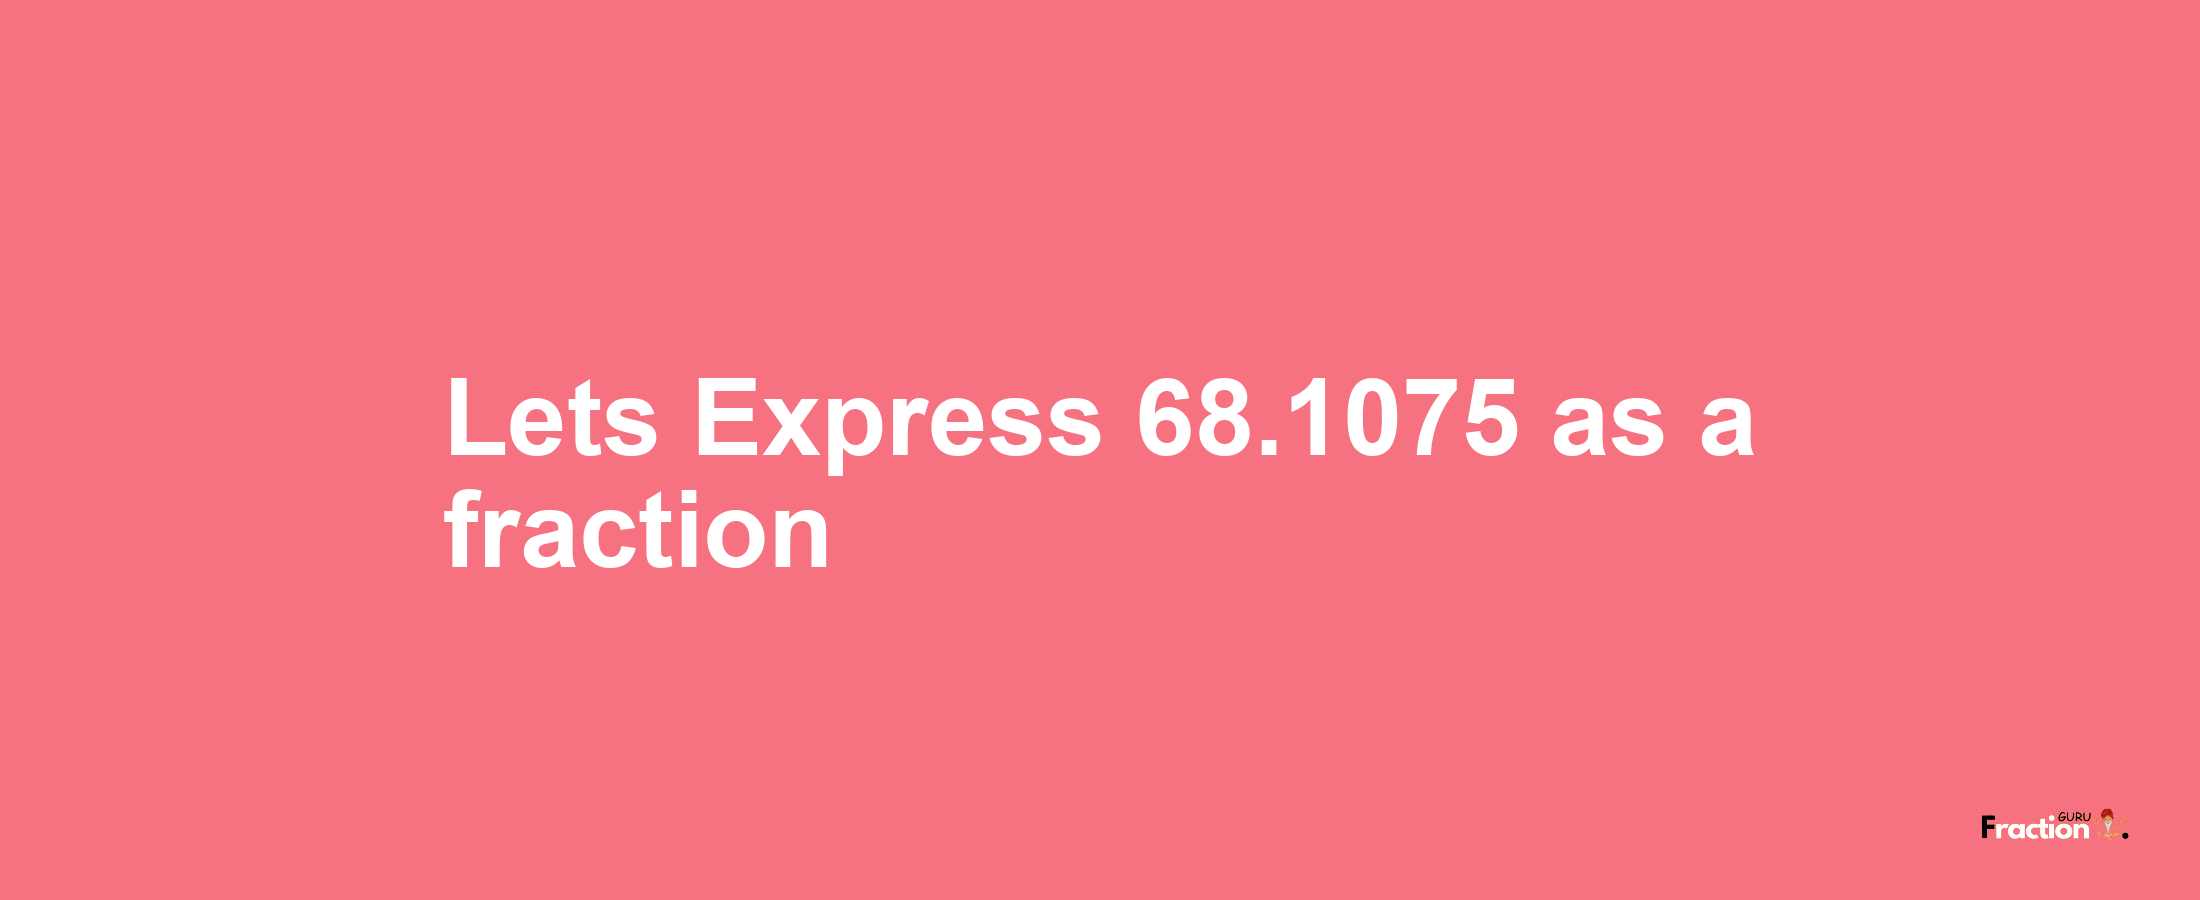 Lets Express 68.1075 as afraction